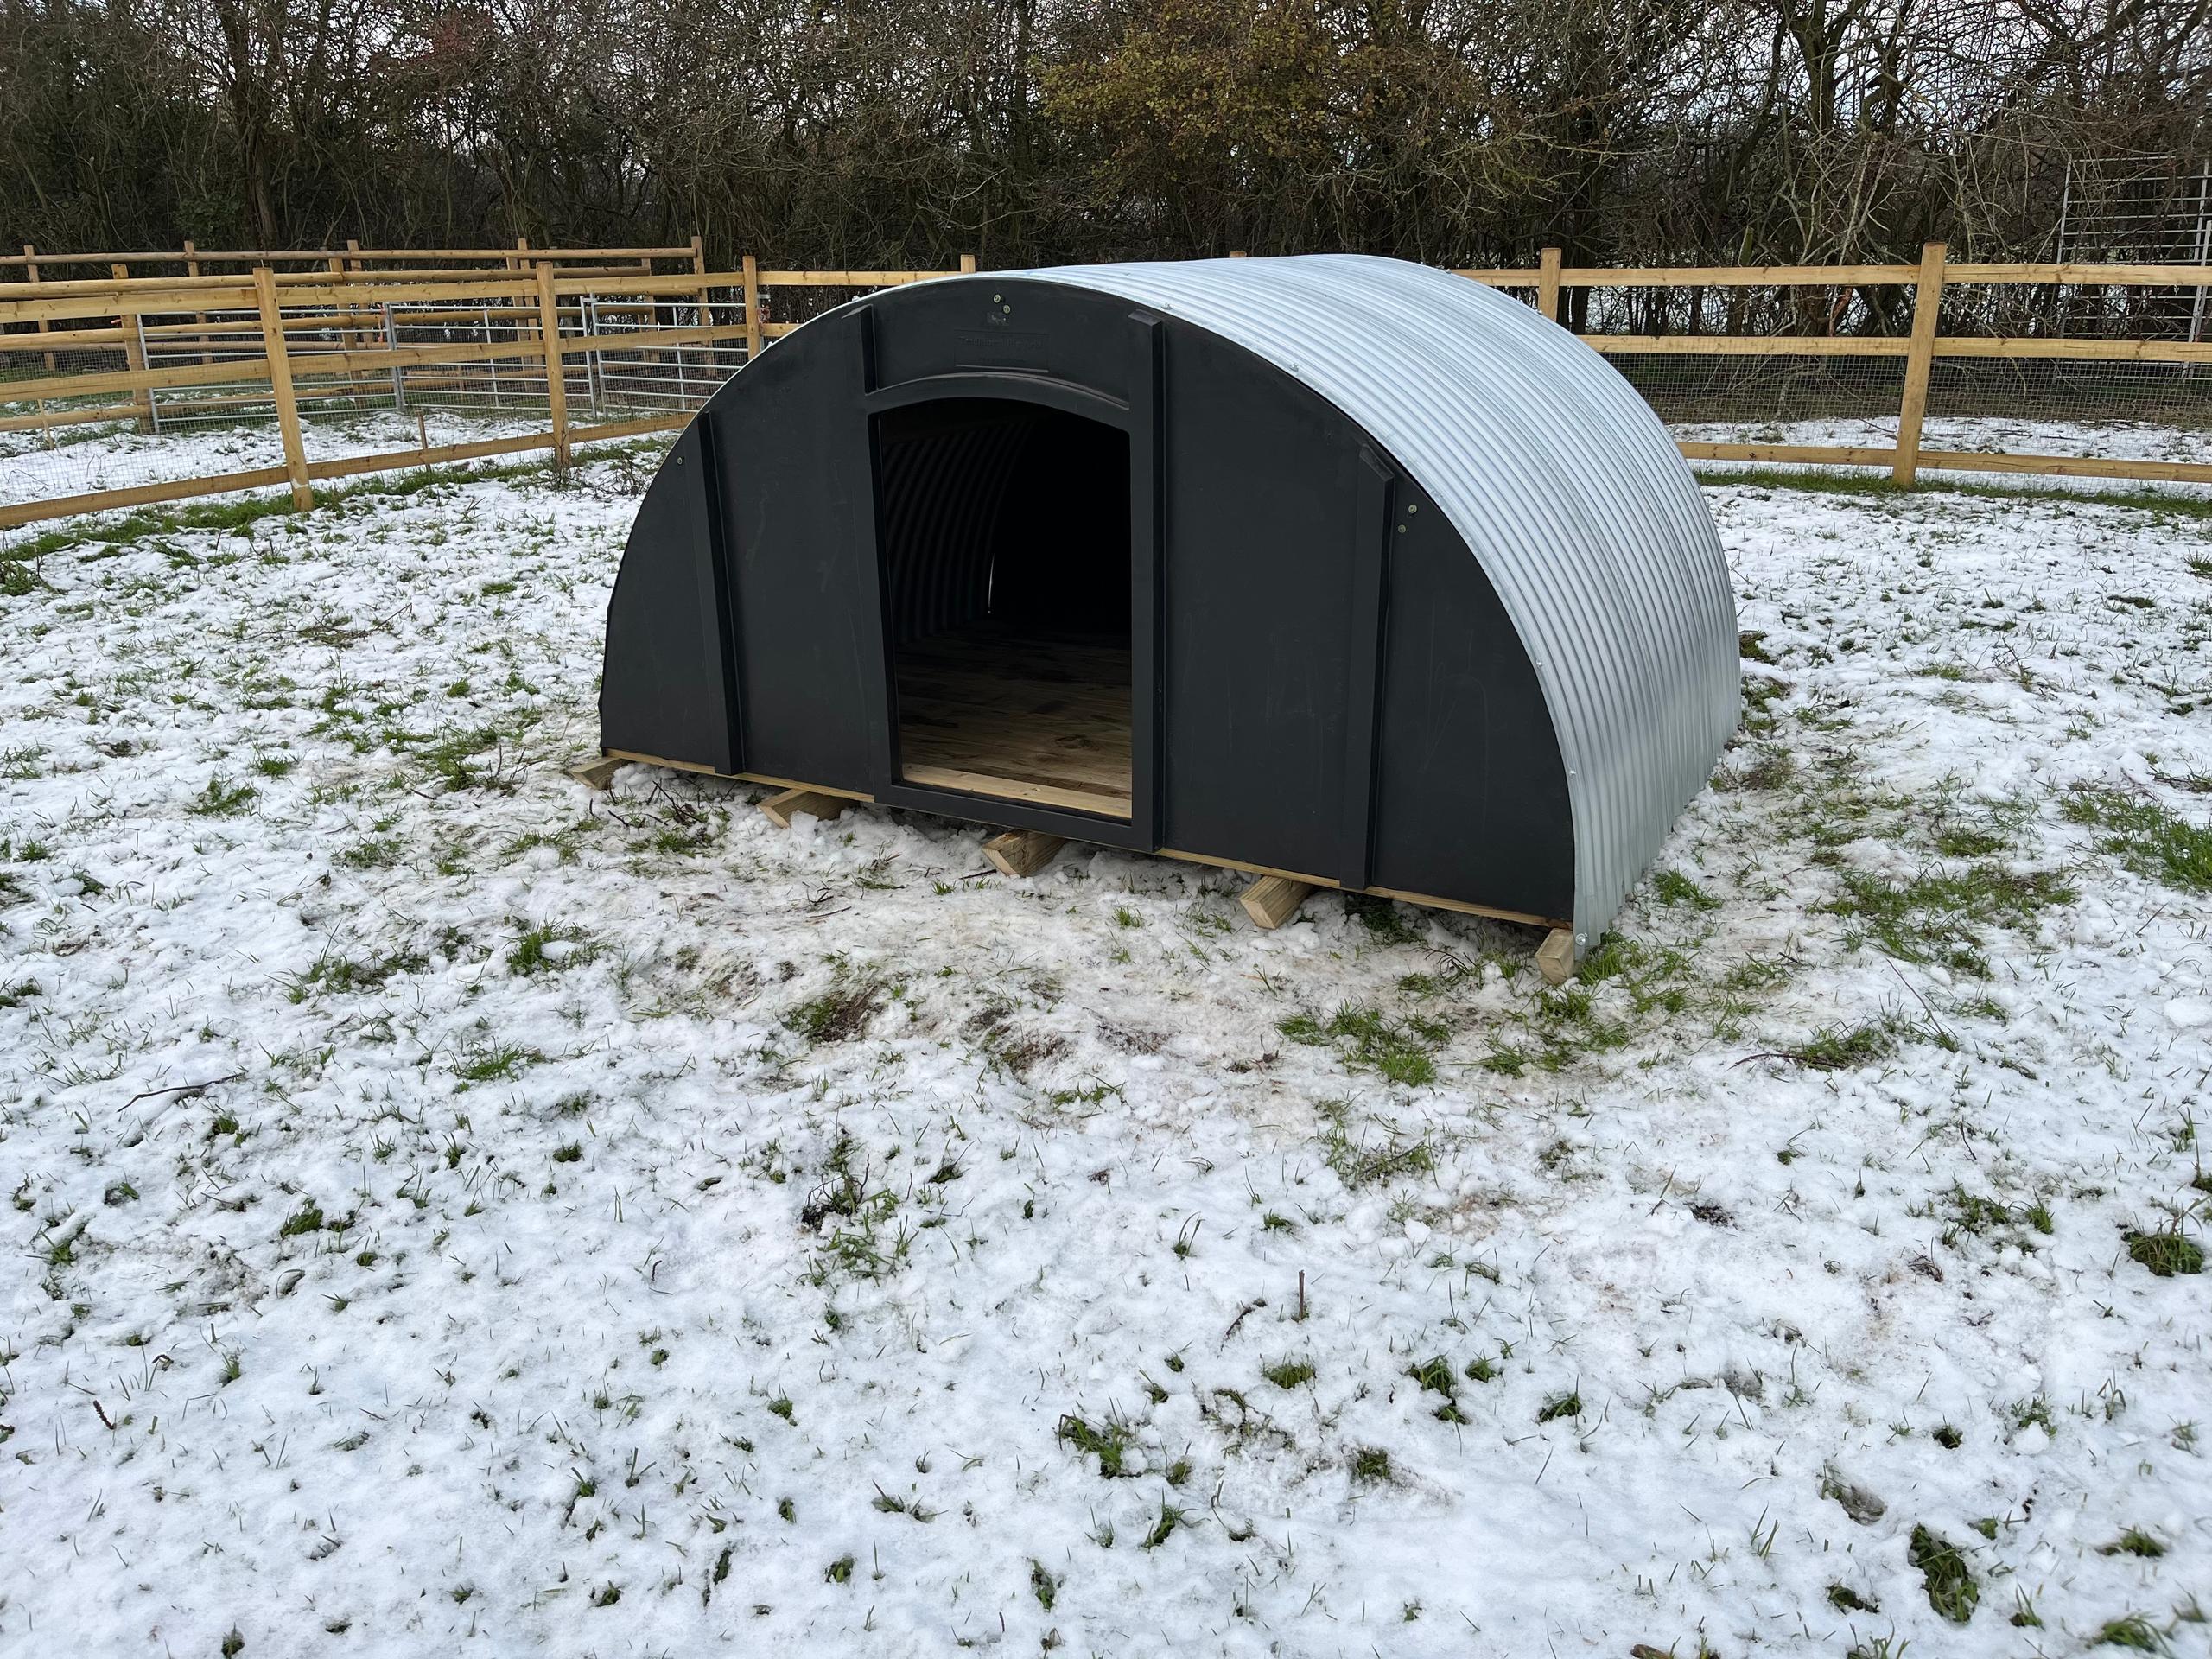 Arks delivered and assembled for a customer in Essex for their pigs.